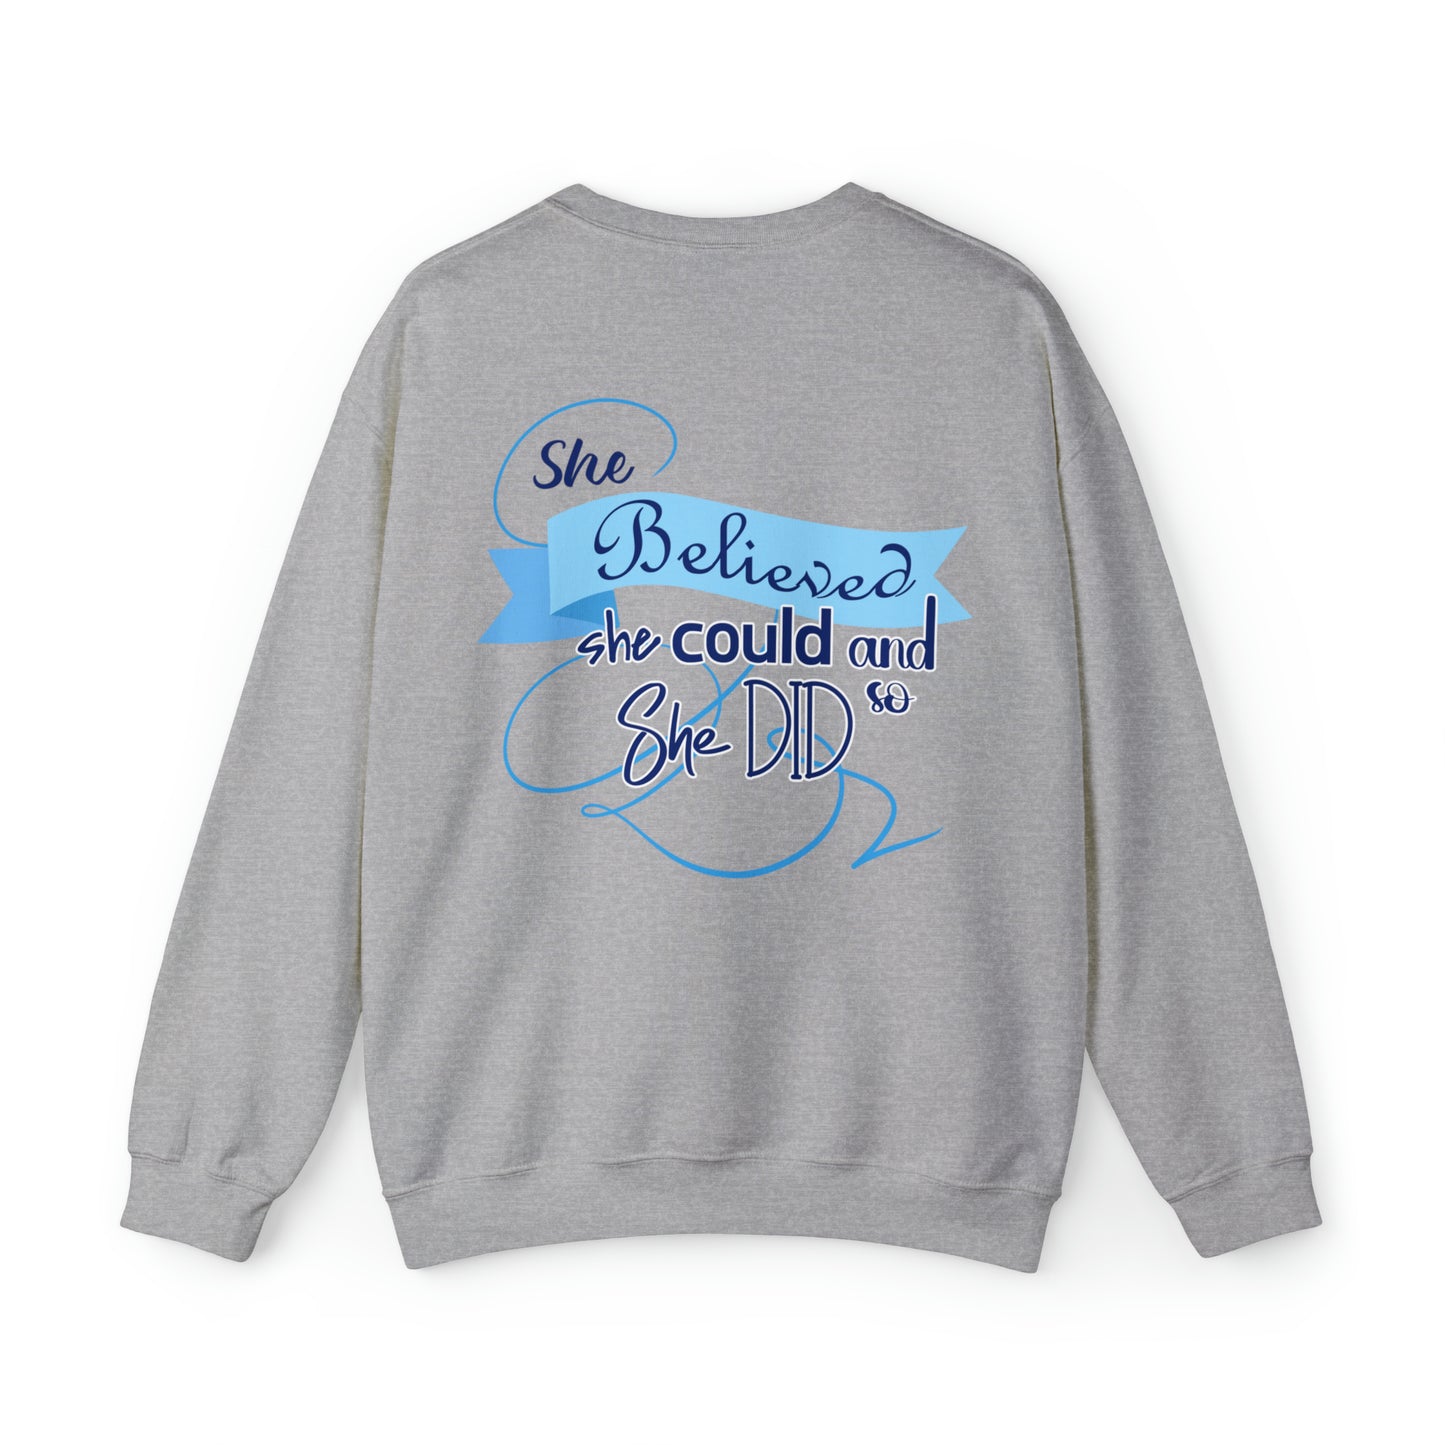 Eviana Robles: She Believed She Could & She Did So Crewneck